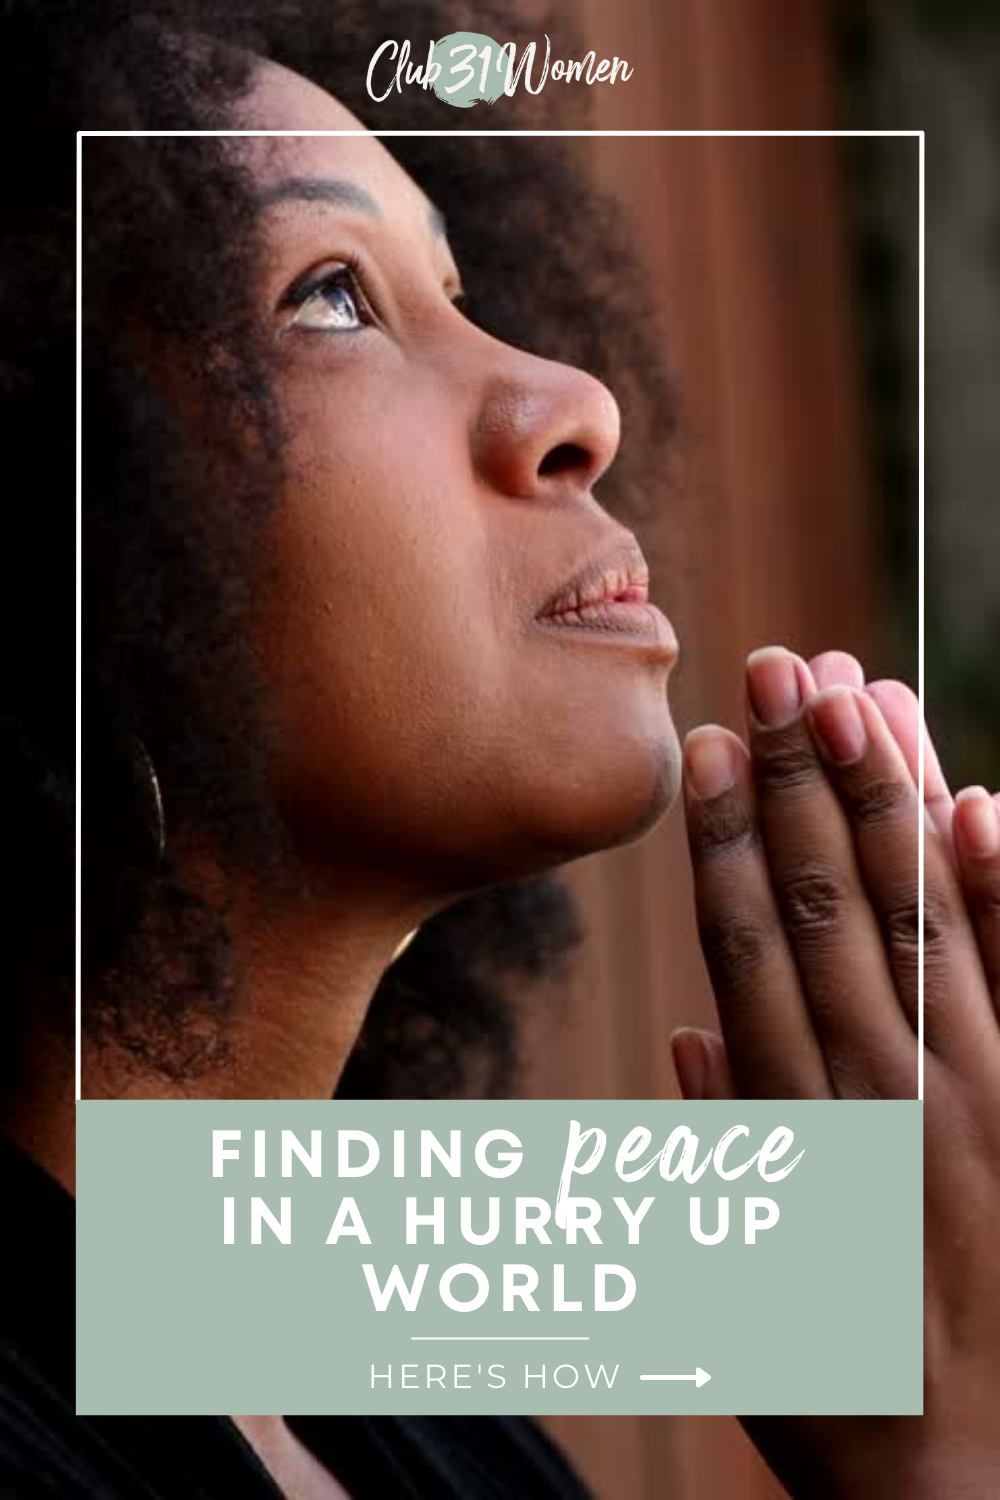 How can we bring a more peaceful pace in a world that is constantly wanting us to hurry up? What if those middle minutes just aren't enough? via @Club31Women